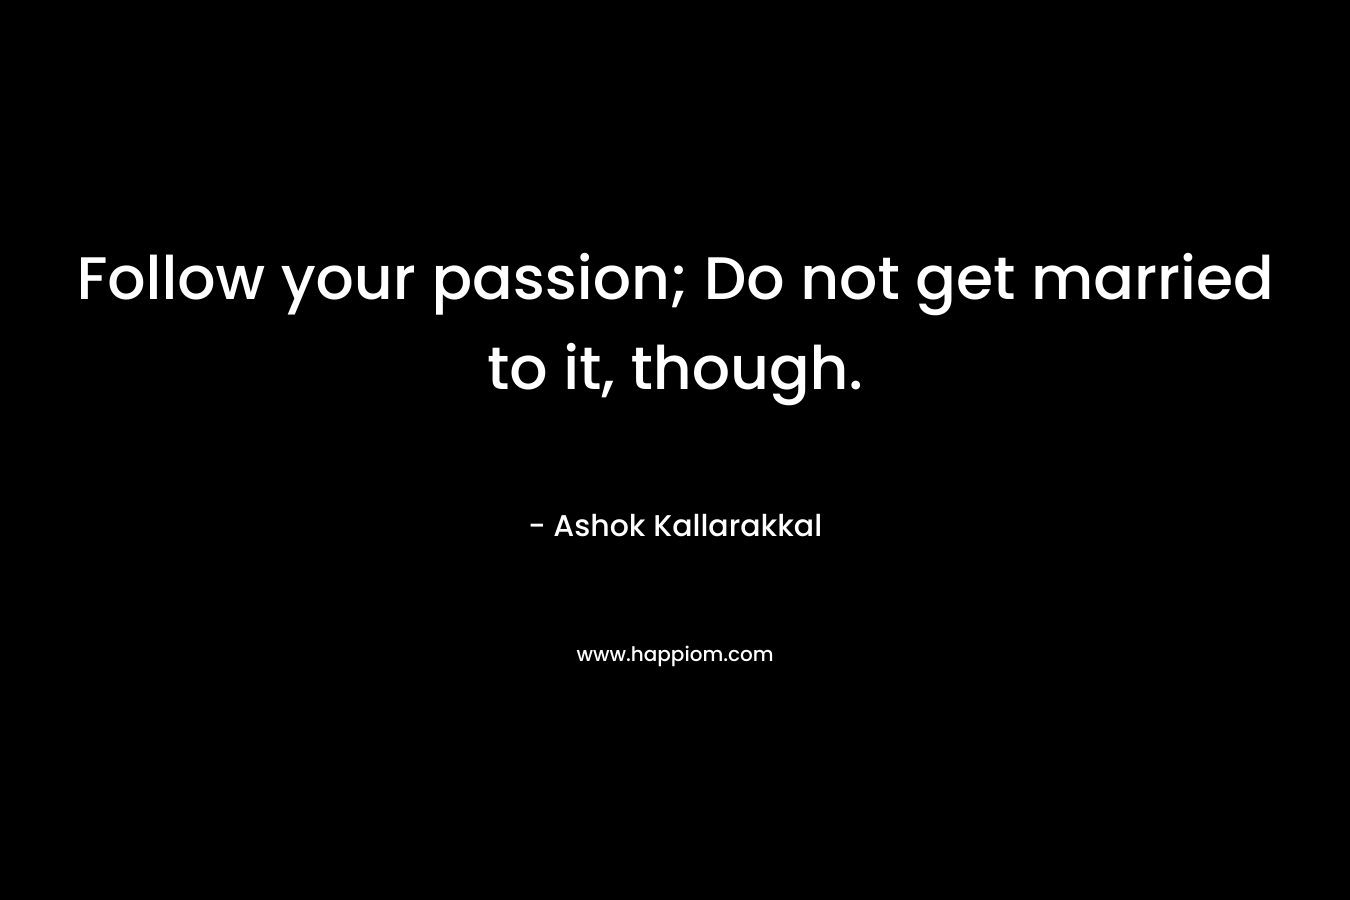 Follow your passion; Do not get married to it, though.